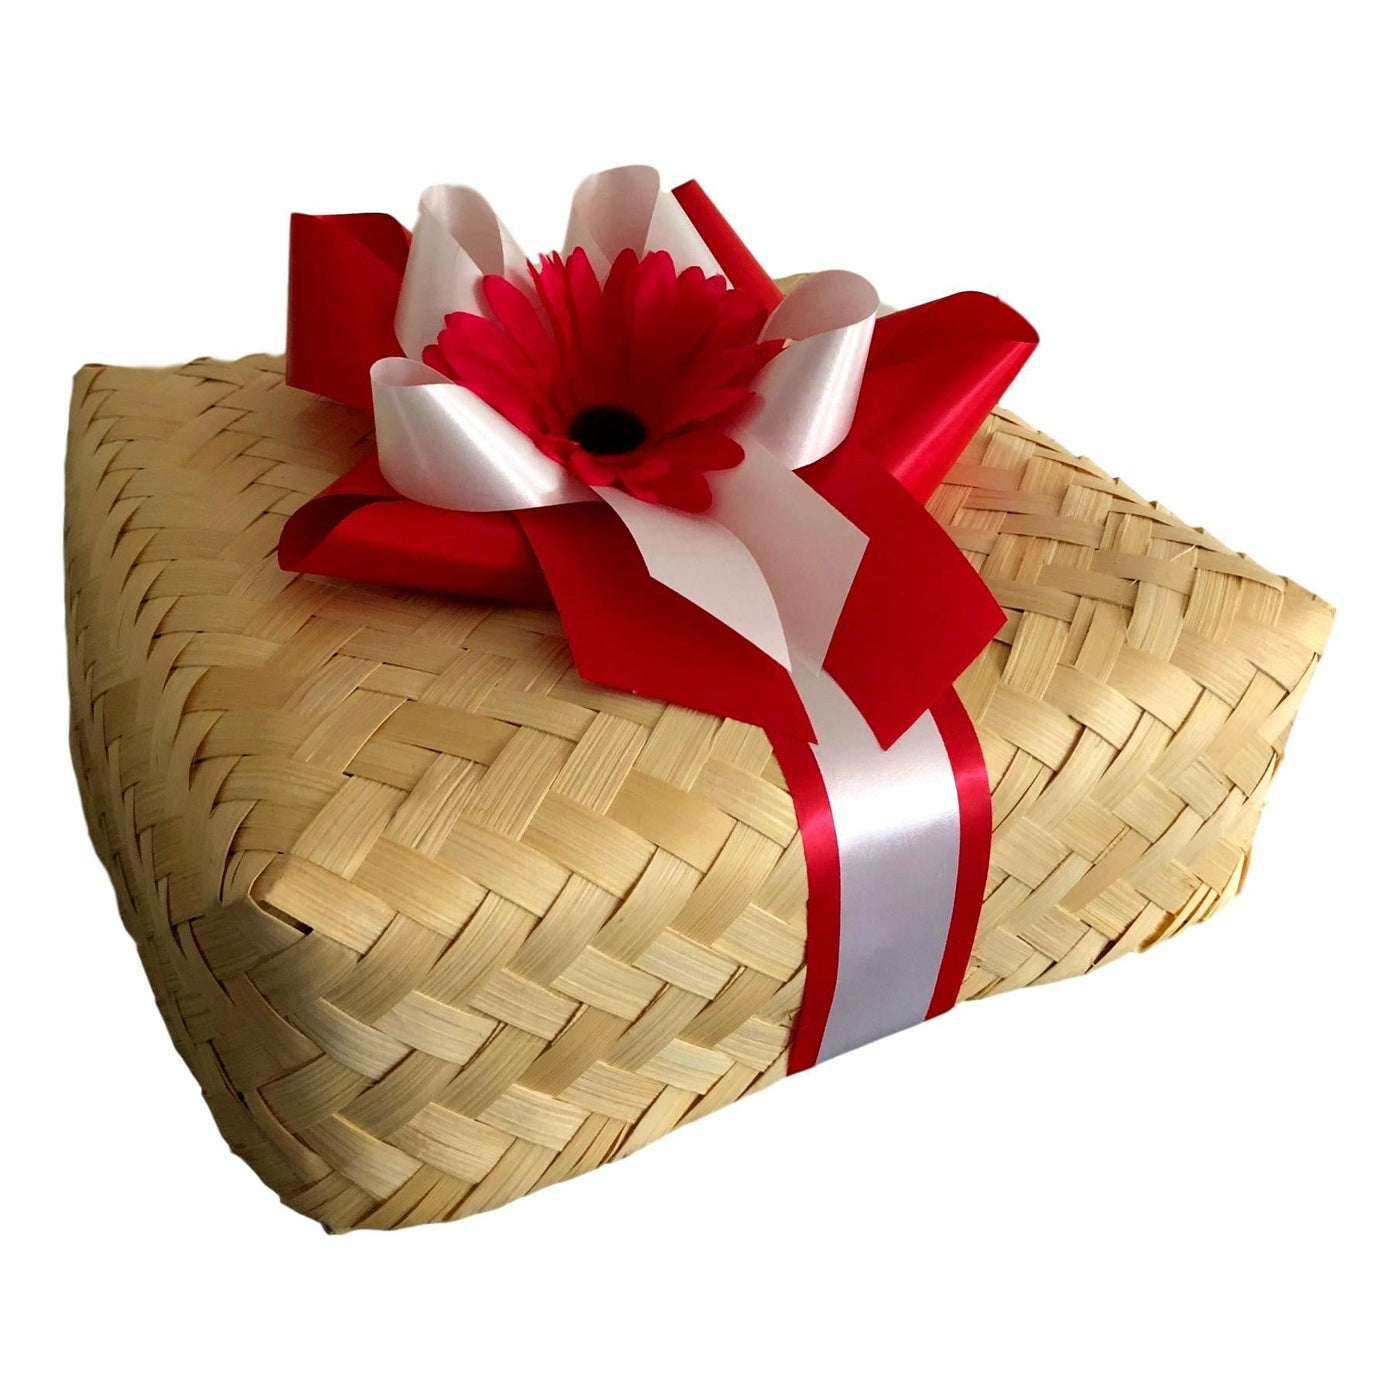 Sympathy gift hampers and gift boxes - Basket Creations NZ